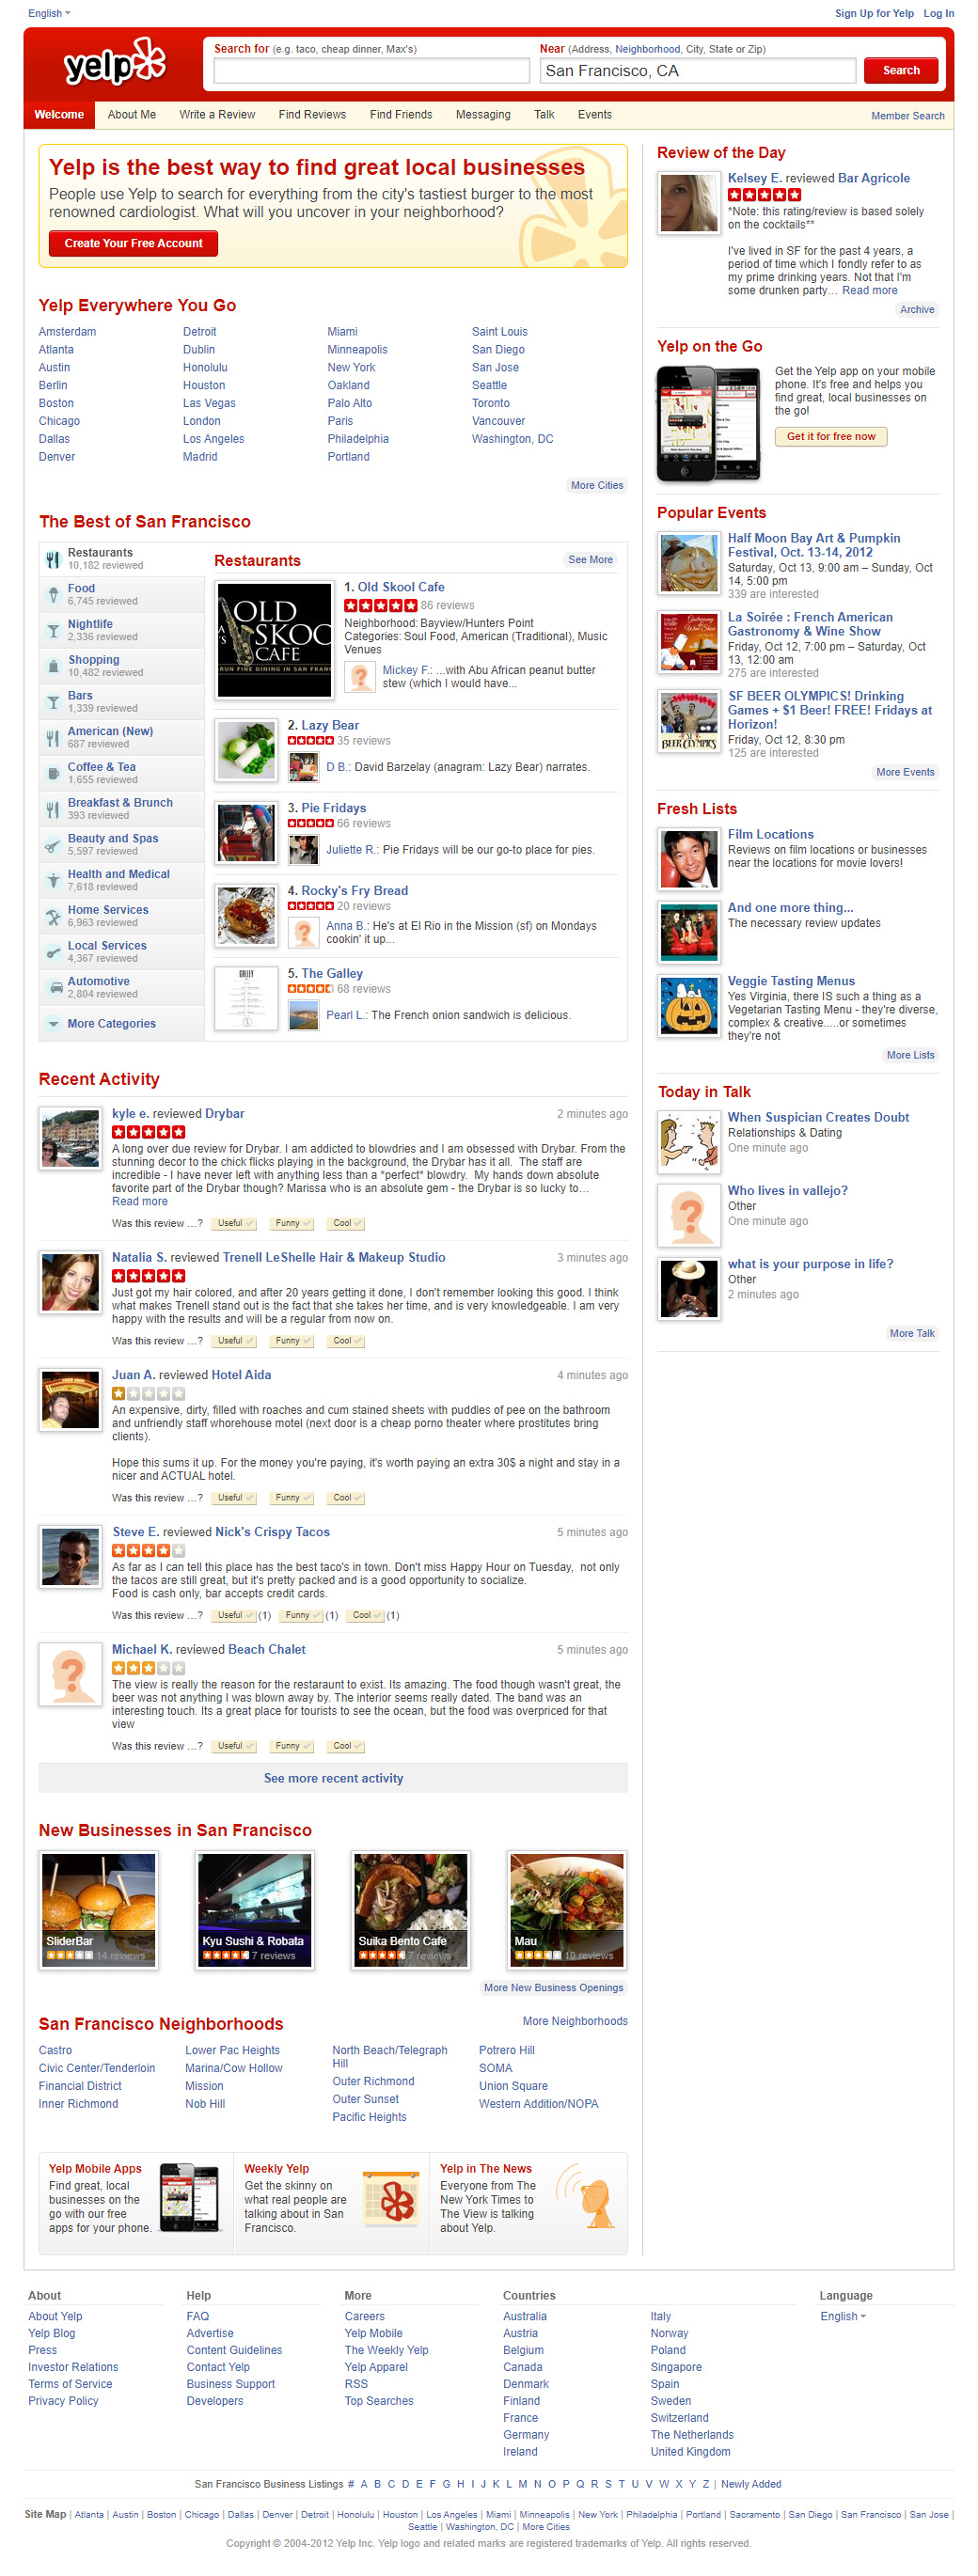 Yelp in 2012